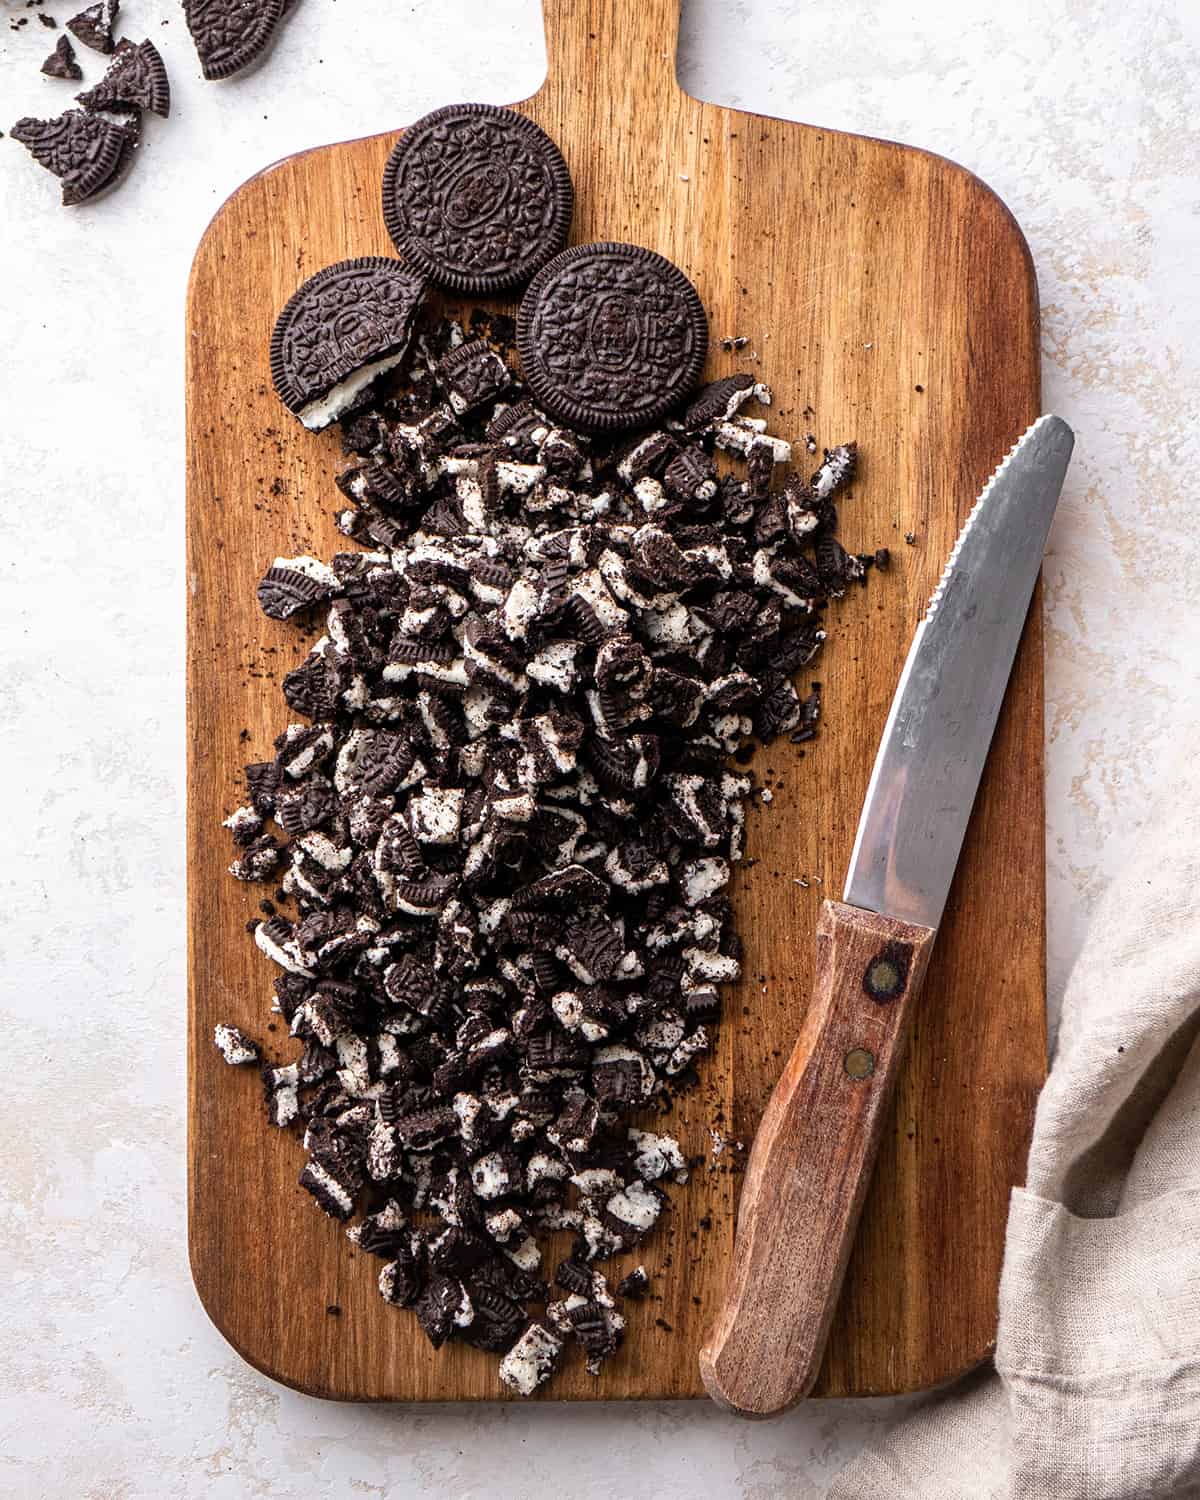 coarsely chopped oreos on a wooden cutting board to make oreo pie